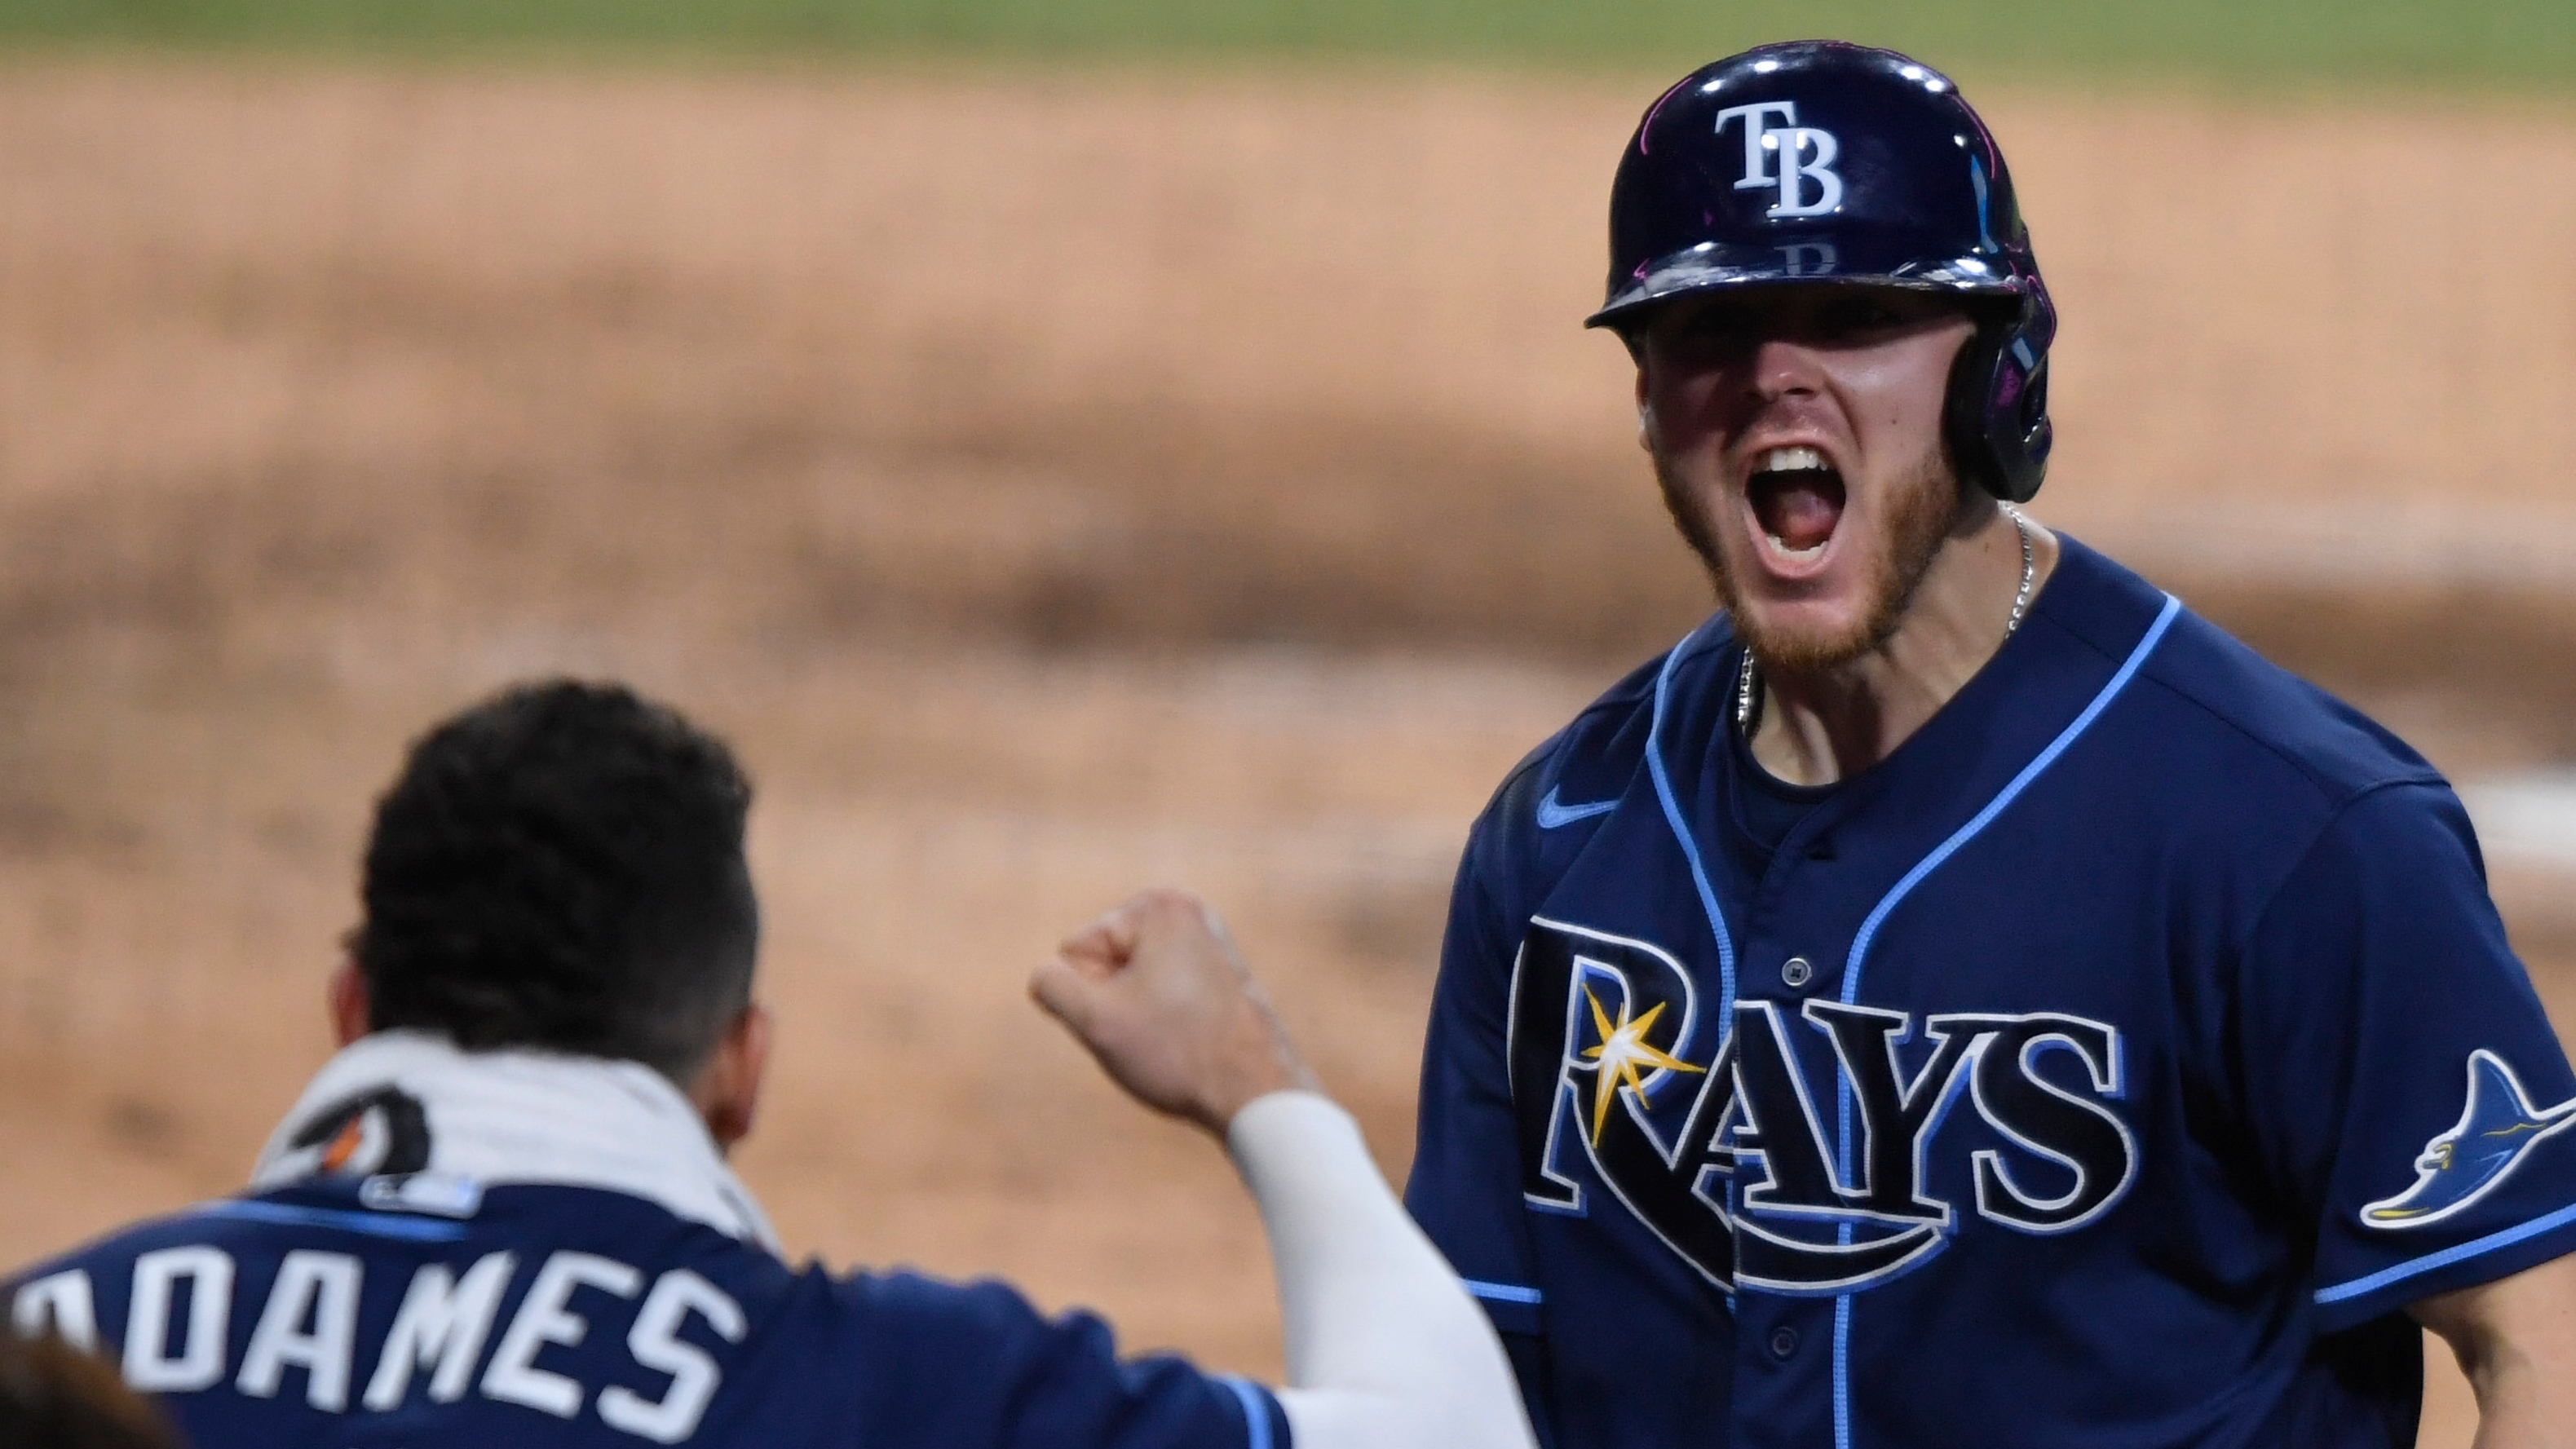 Willy Adames is the new face of Rays baseball - DRaysBay